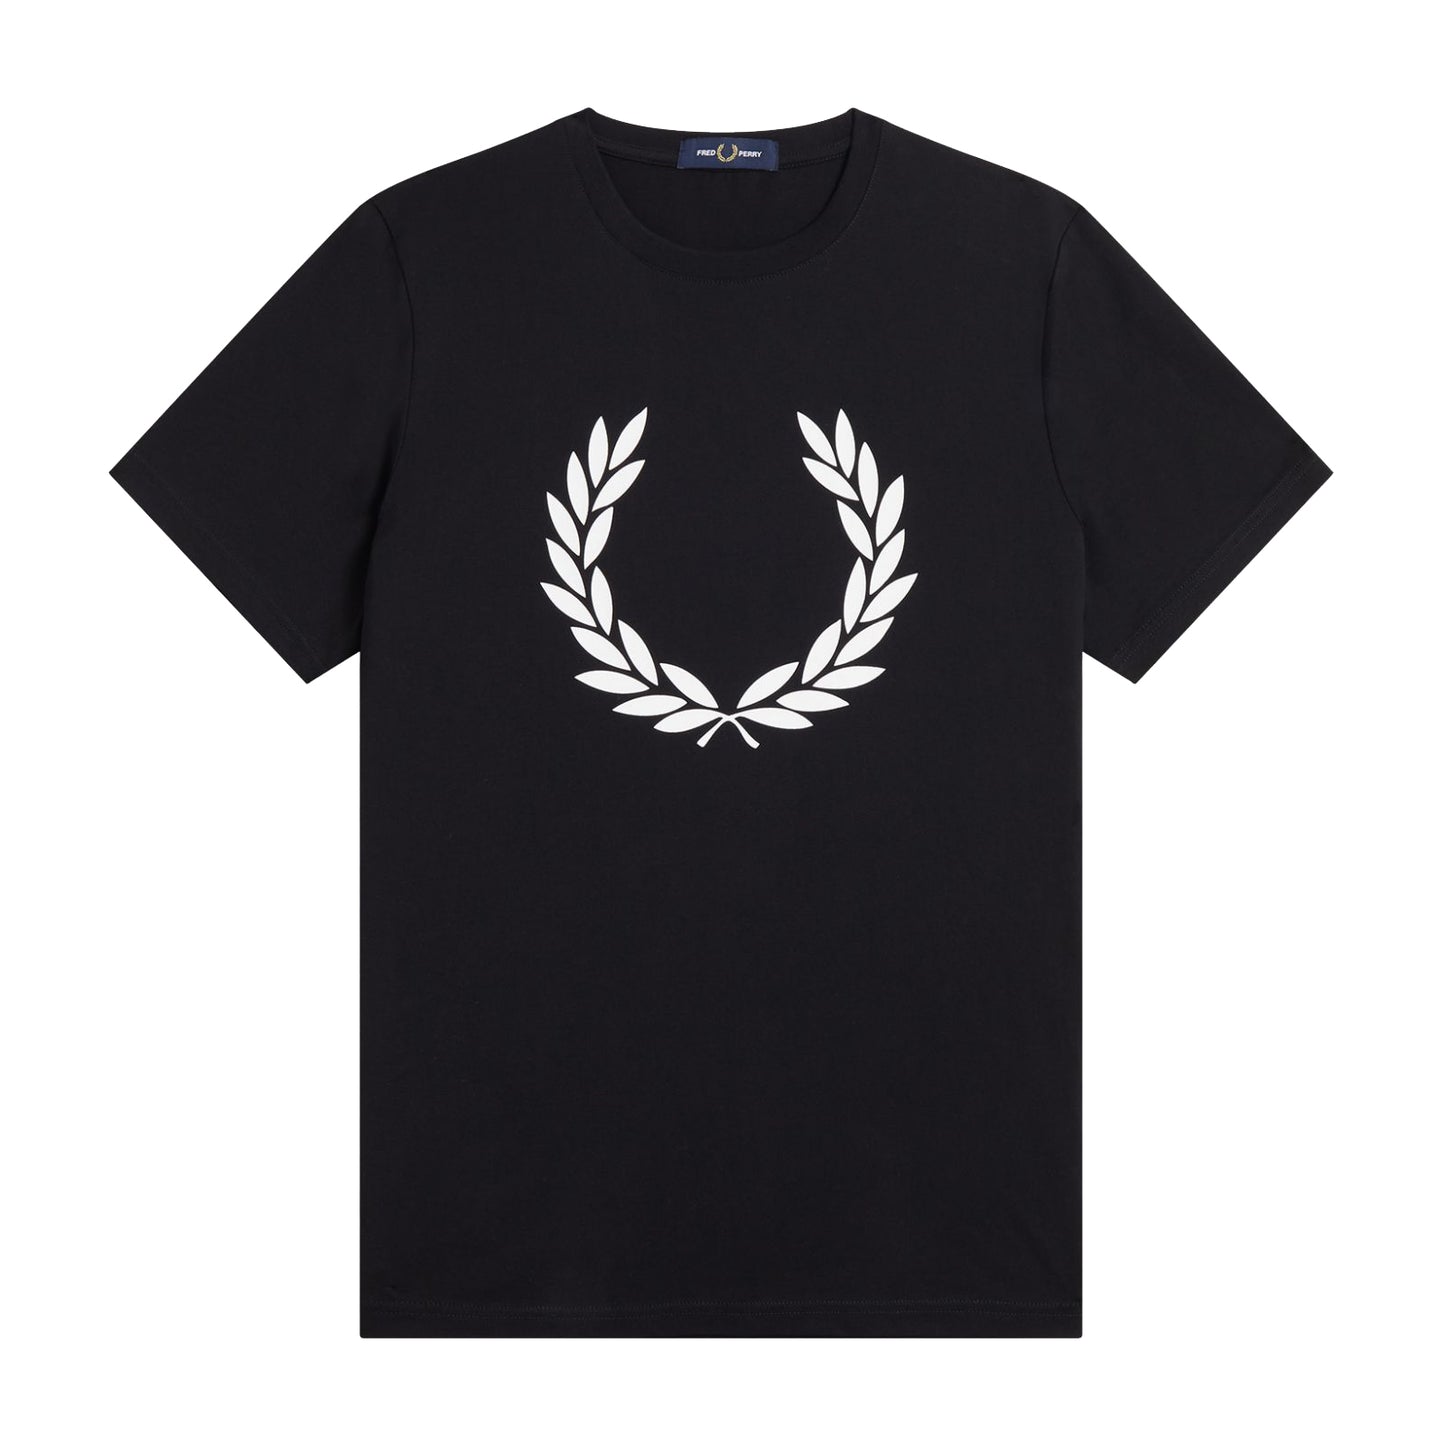 Fred Perry Laurel Wreath Print T-Shirt